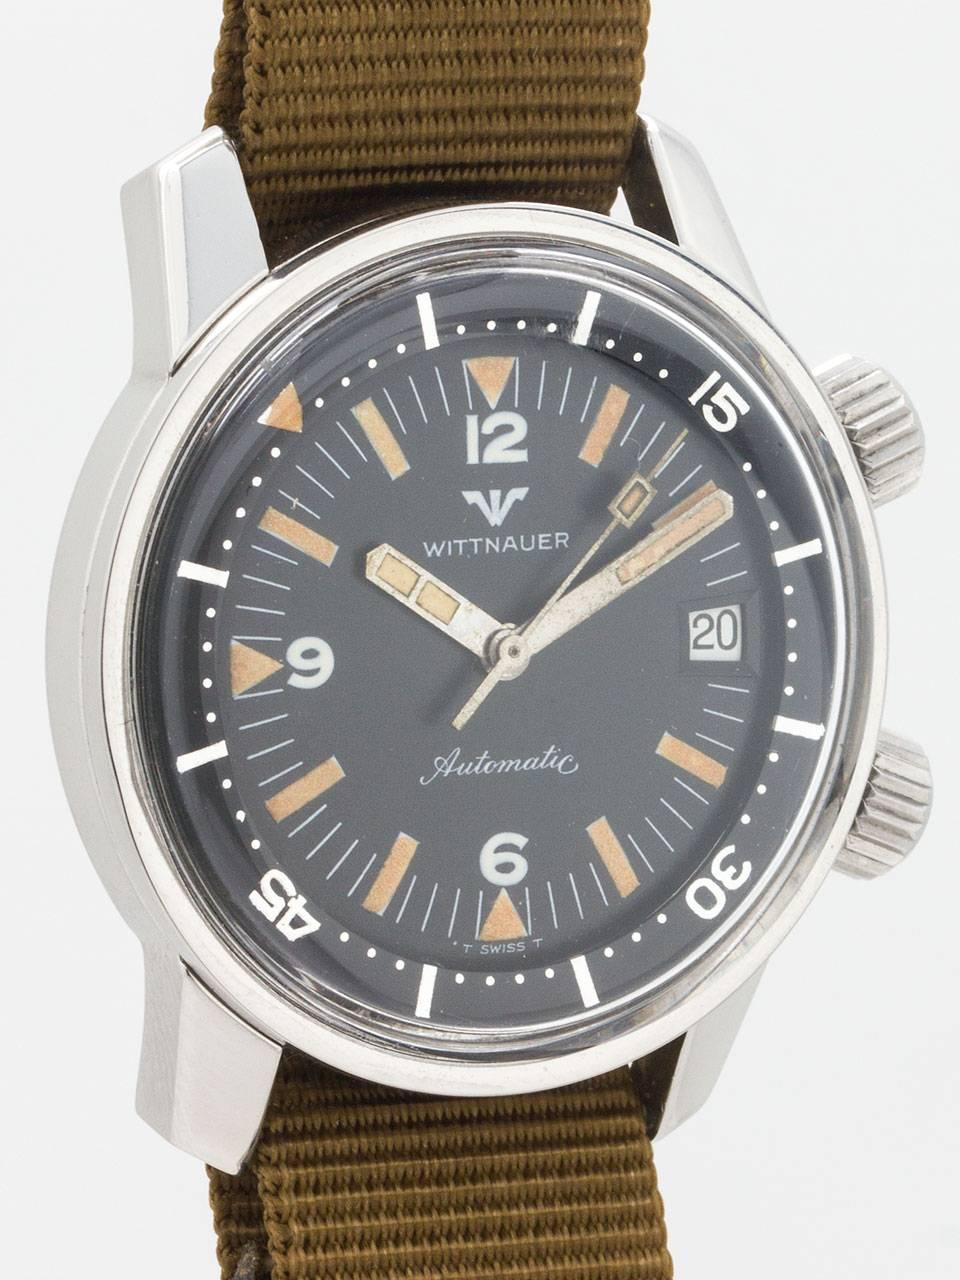 Wittnauer Super Compressor Diver's Wristwatch circa 1960s. Featuring robust 39 x 47mm case with screw down back and wide inner elapsed time bezel with acrylic crystal. Original matte black dial with gorgeous and richly patina’d luminous arabic and